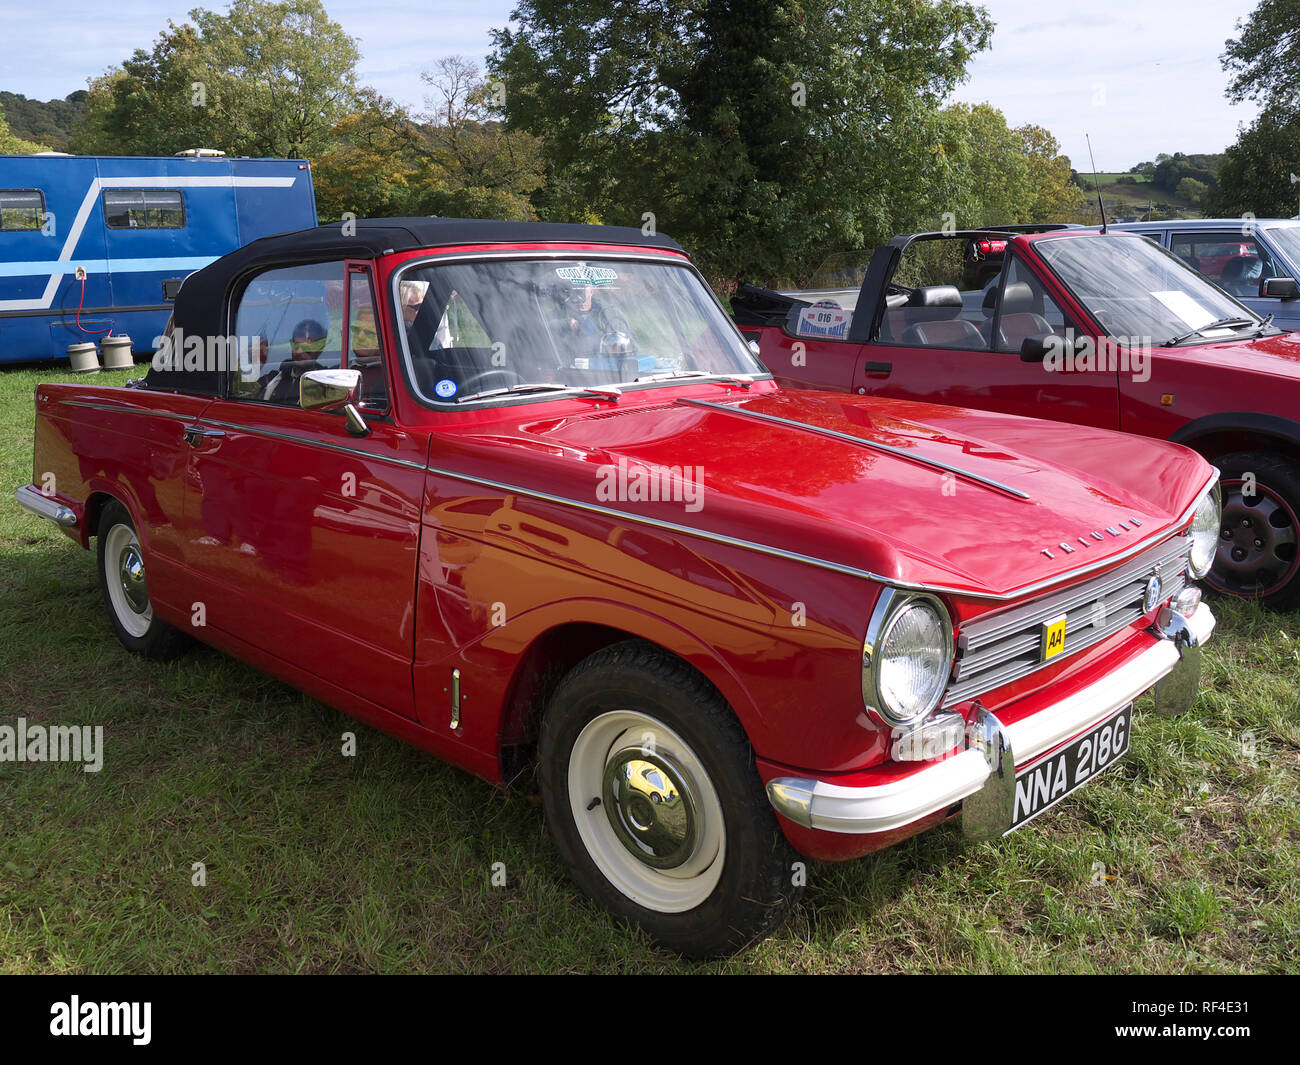 1968/69 classic Triumph Herald on display at Ashover Festival of Lights Stock Photo